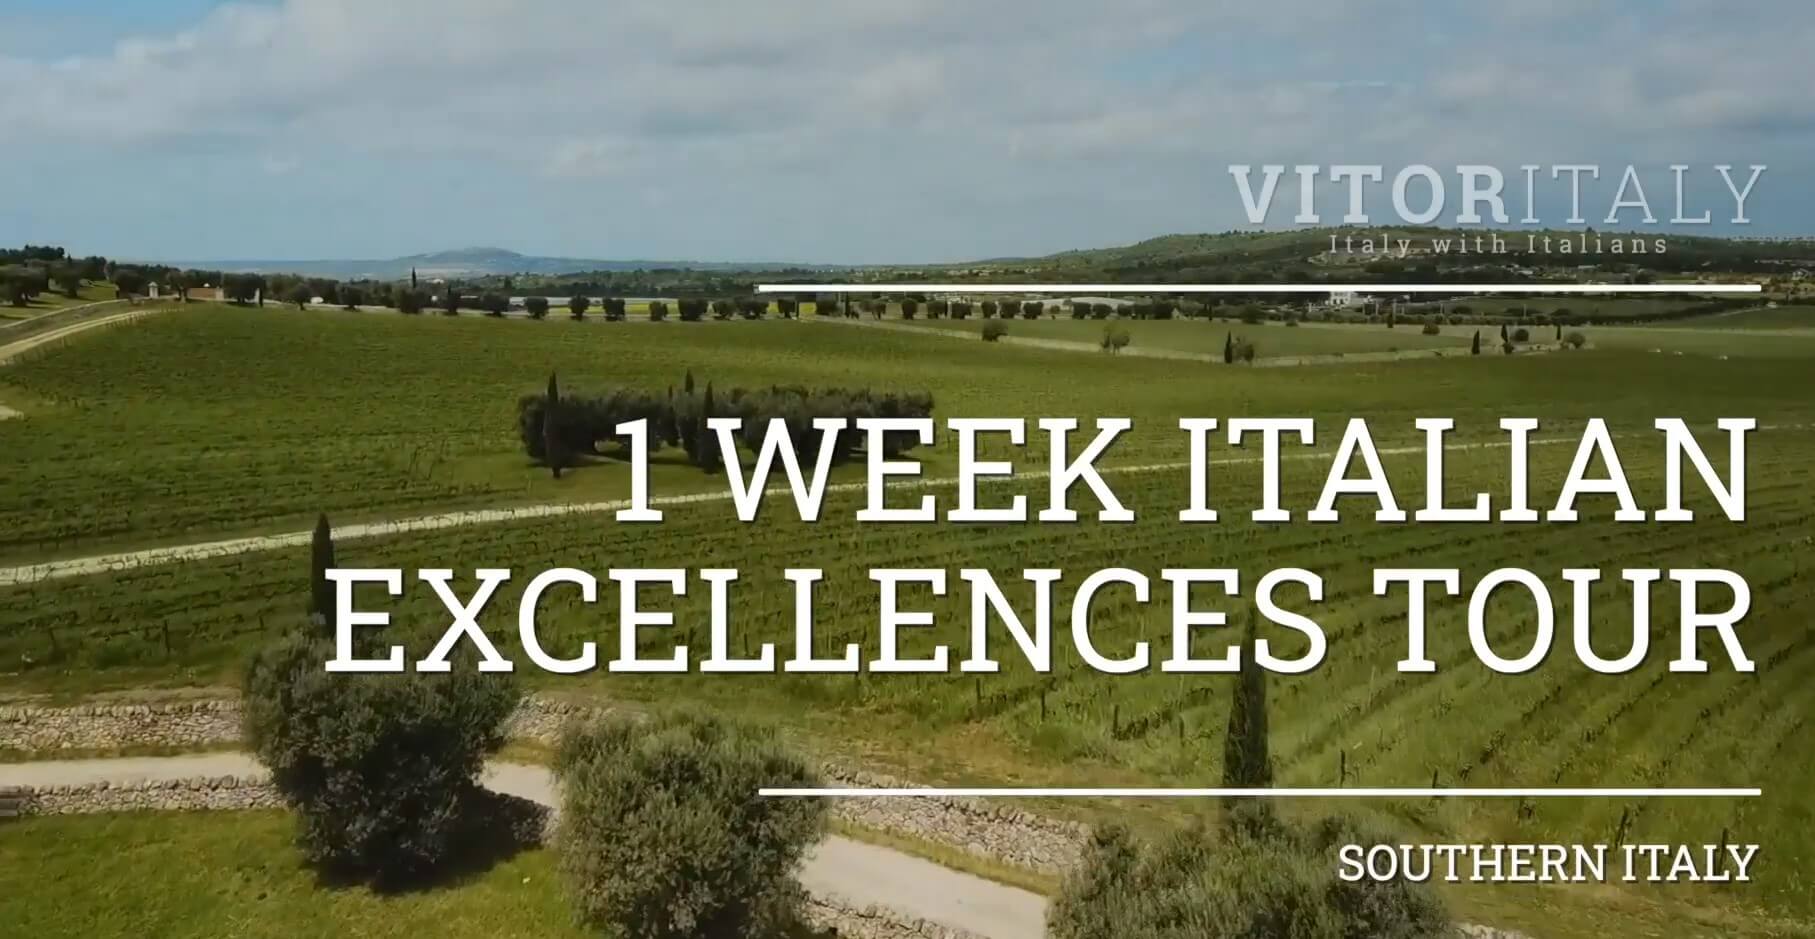 1-WEEK ITALIAN EXCELLENCES TOUR - Southern Italy